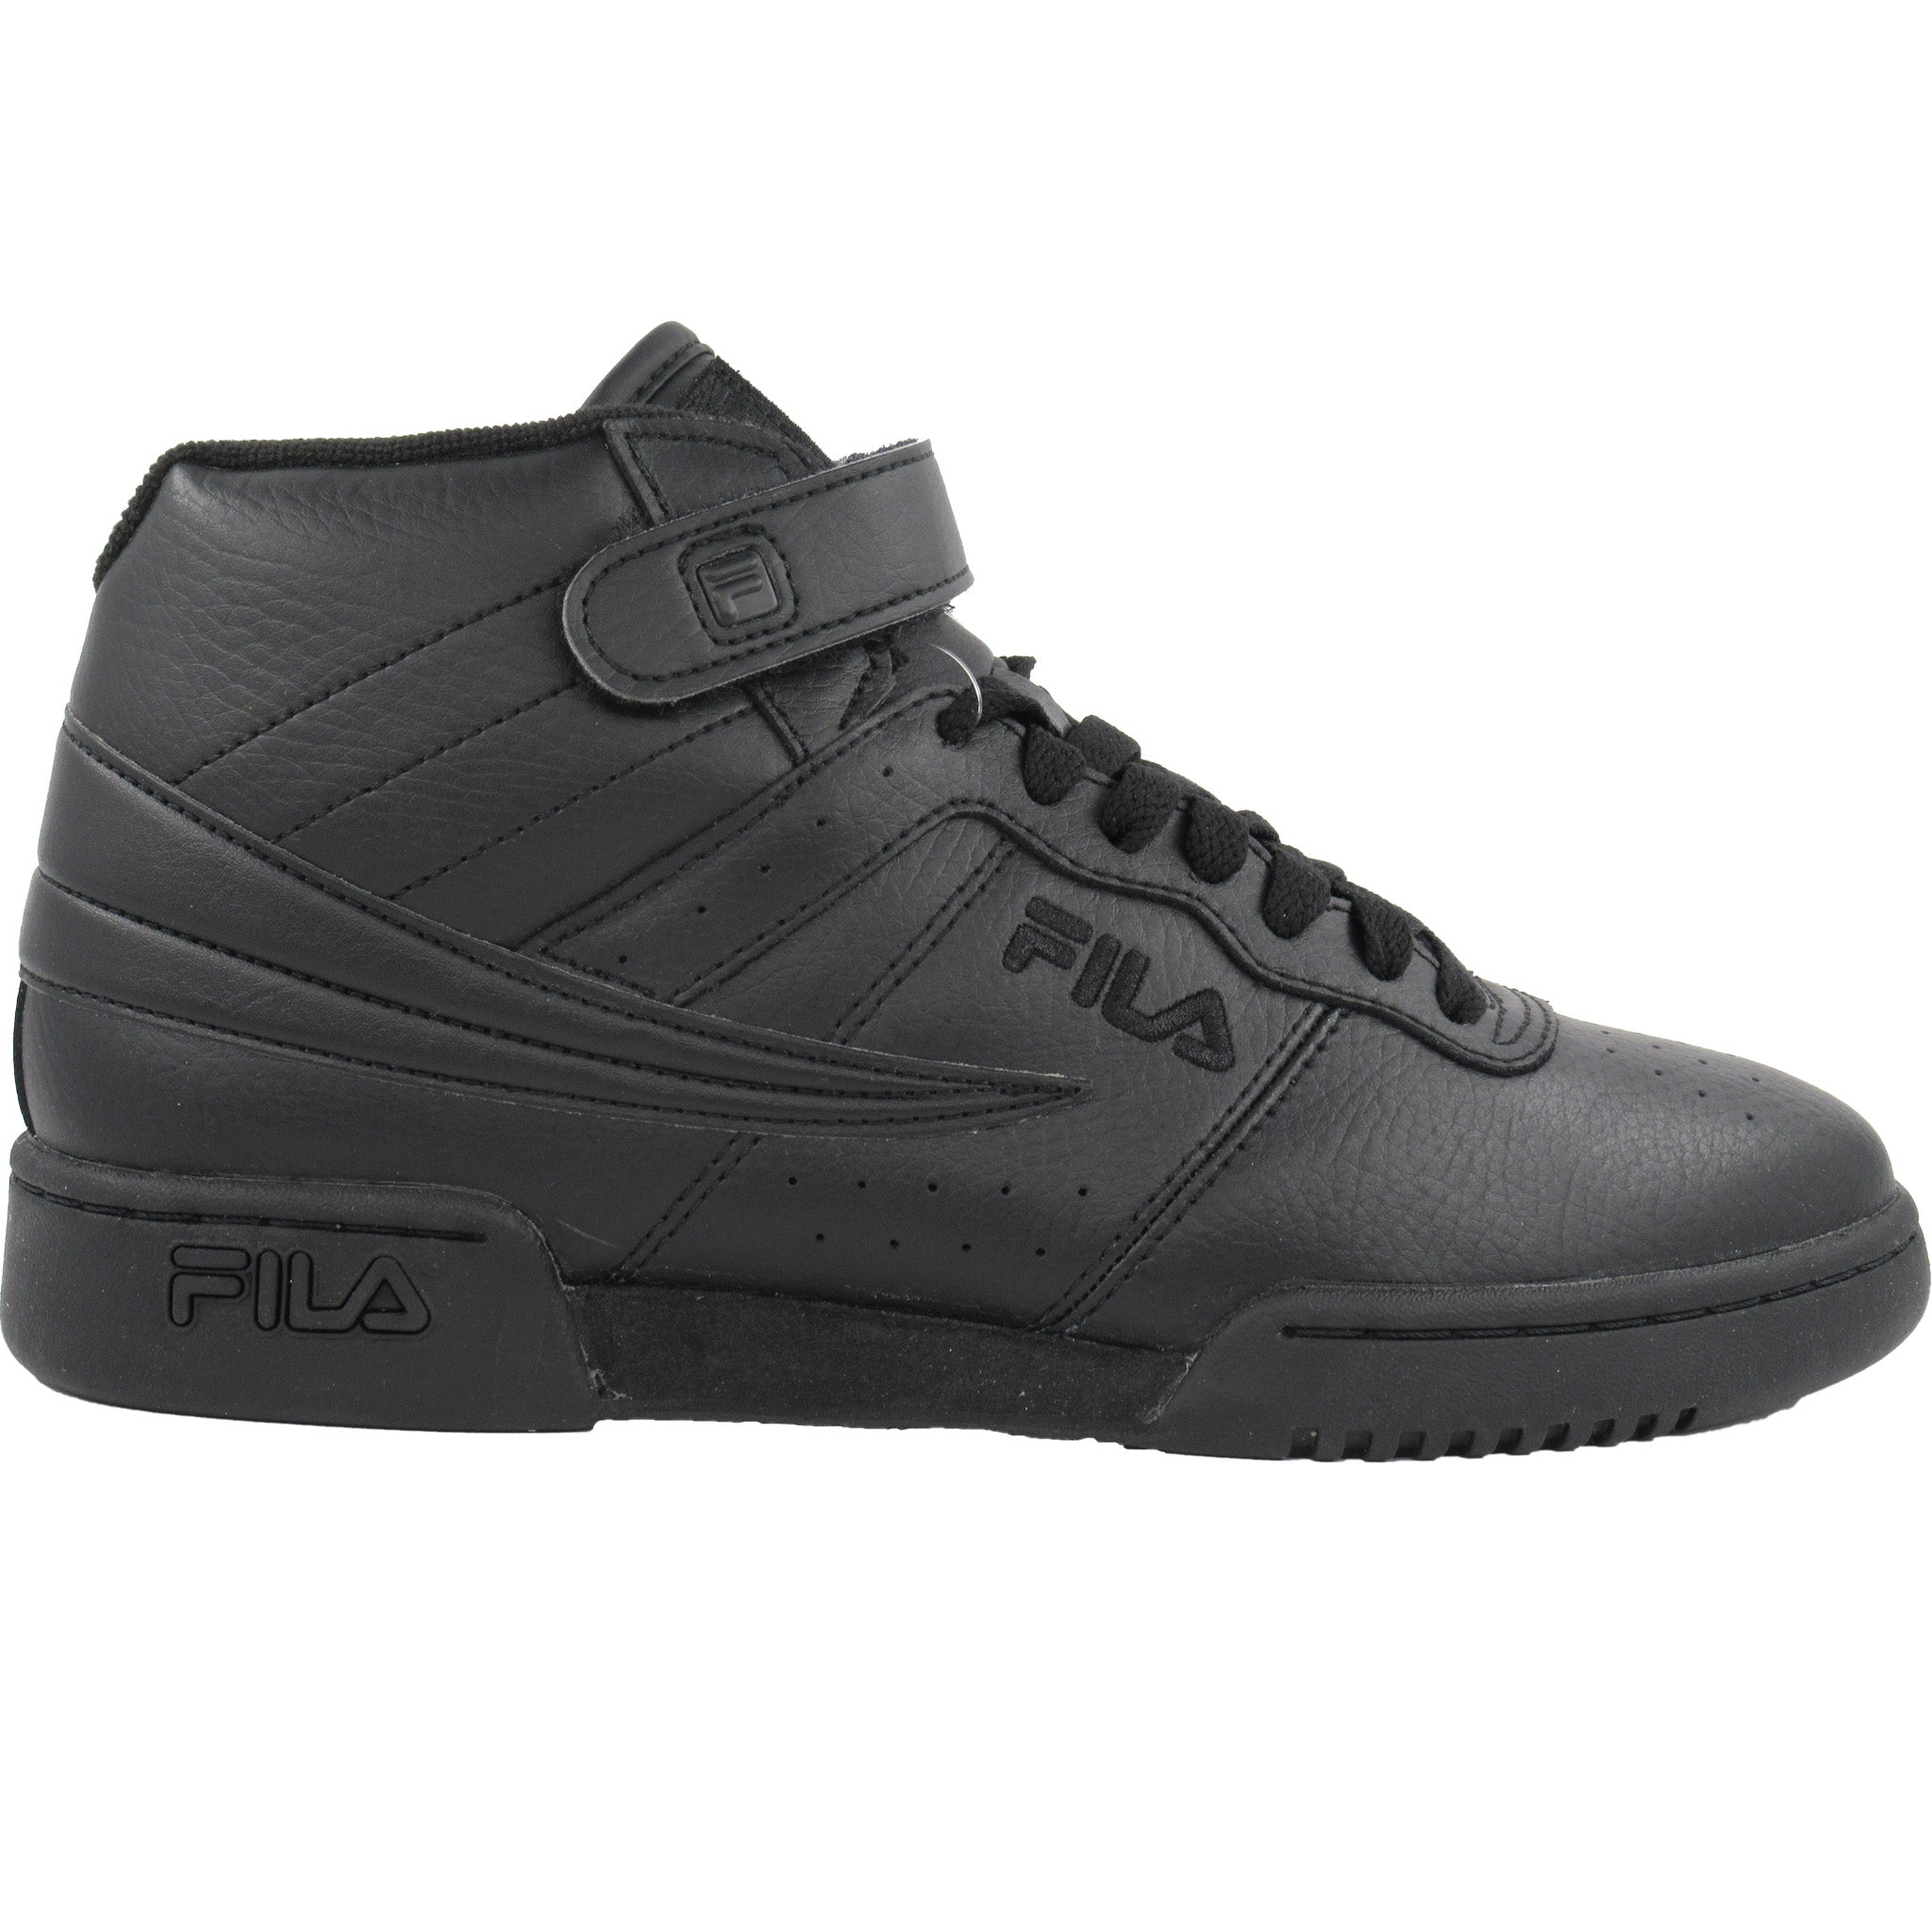 Fila Mens F13 F-13 Leather High Mid Top Casual Classic Basketball Shoes |  eBay